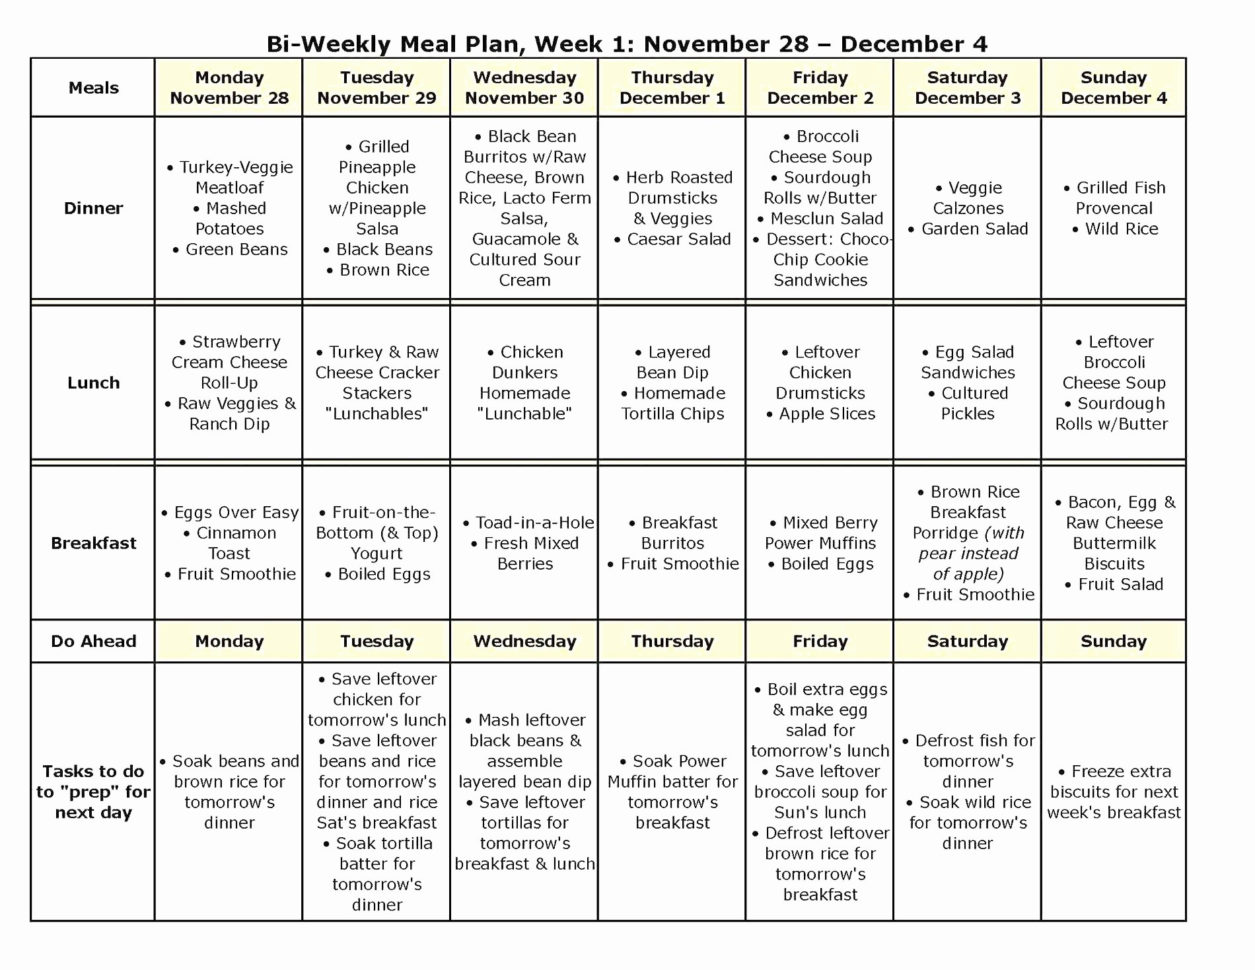 diabetic weekly meal planning chart